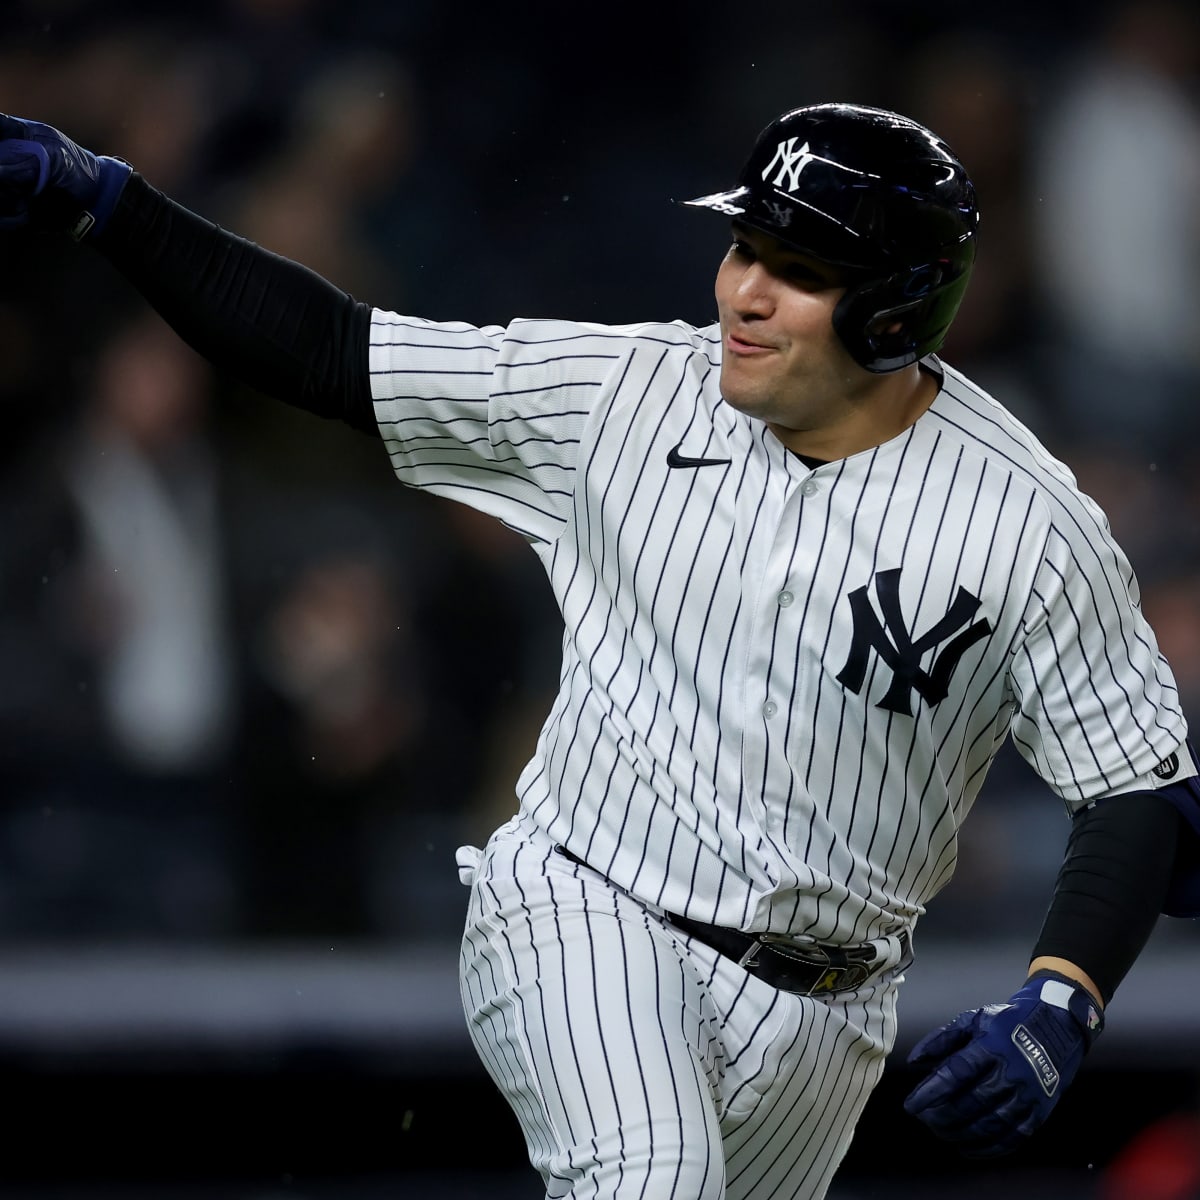 Yankees have 3 options at catcher with Jose Trevino out